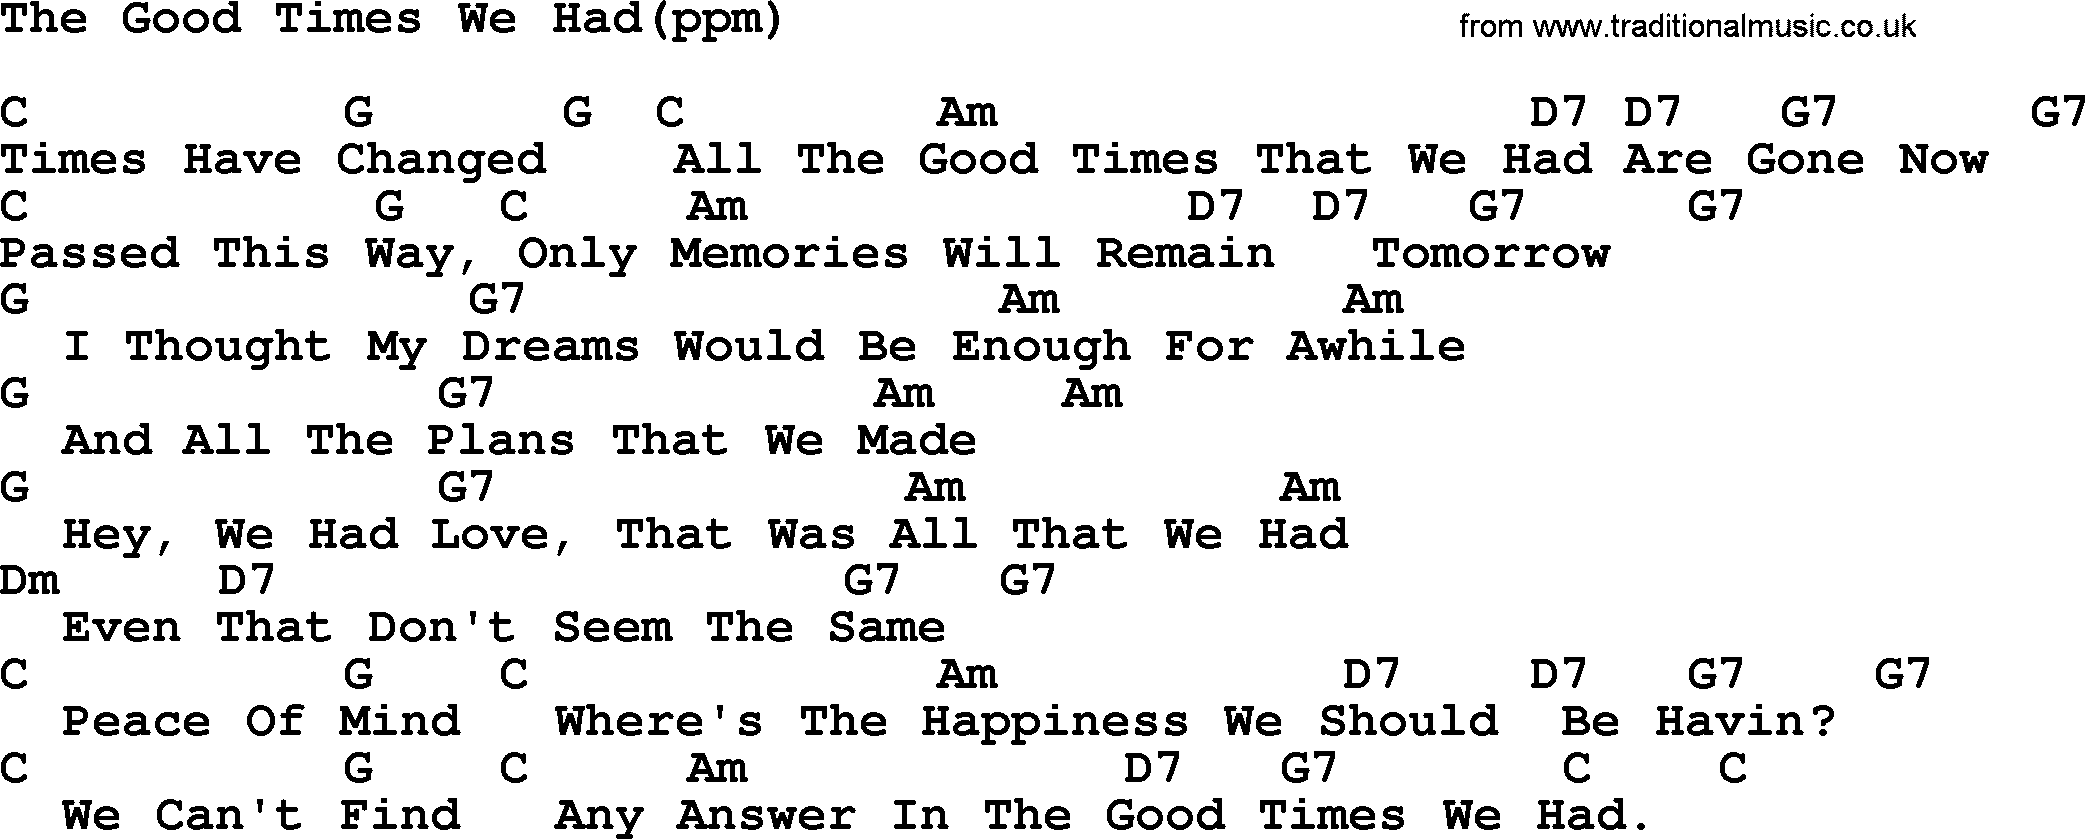 Peter, Paul and Mary song The Good Times We Had, lyrics and chords